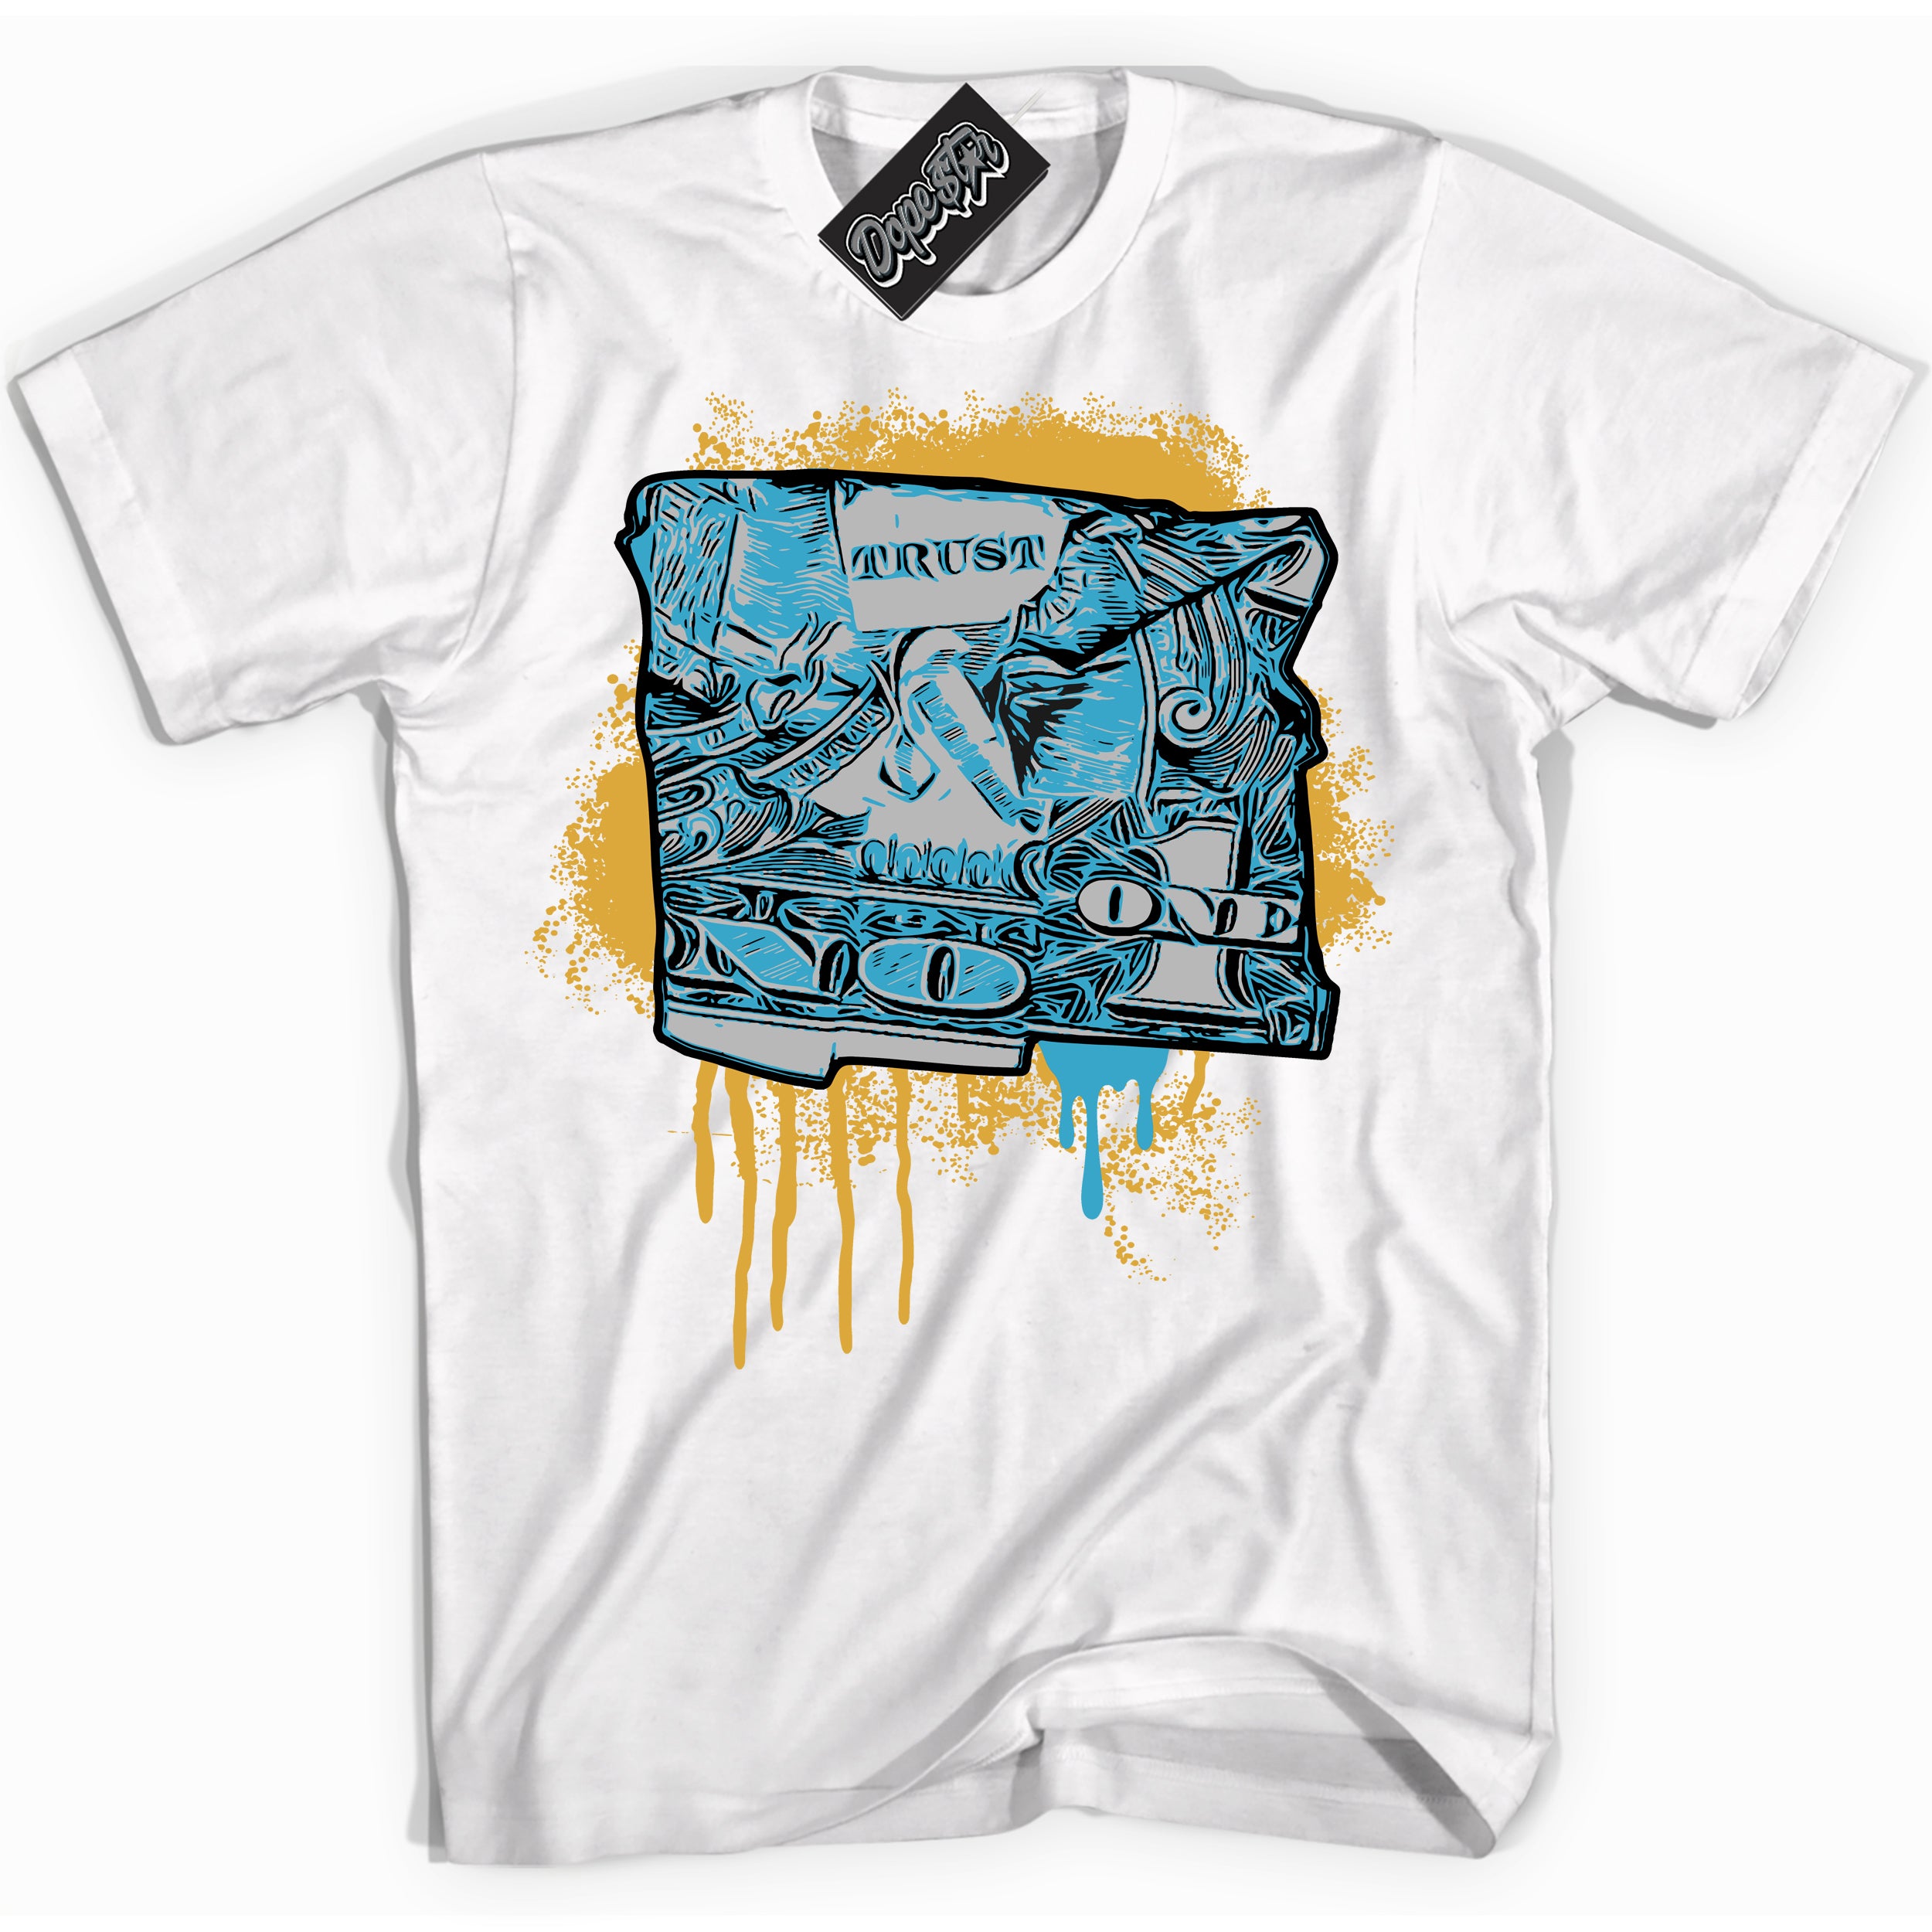 Cool White Shirt with “ Trust No One Dollar” design that perfectly matches Aqua 5s Sneakers.